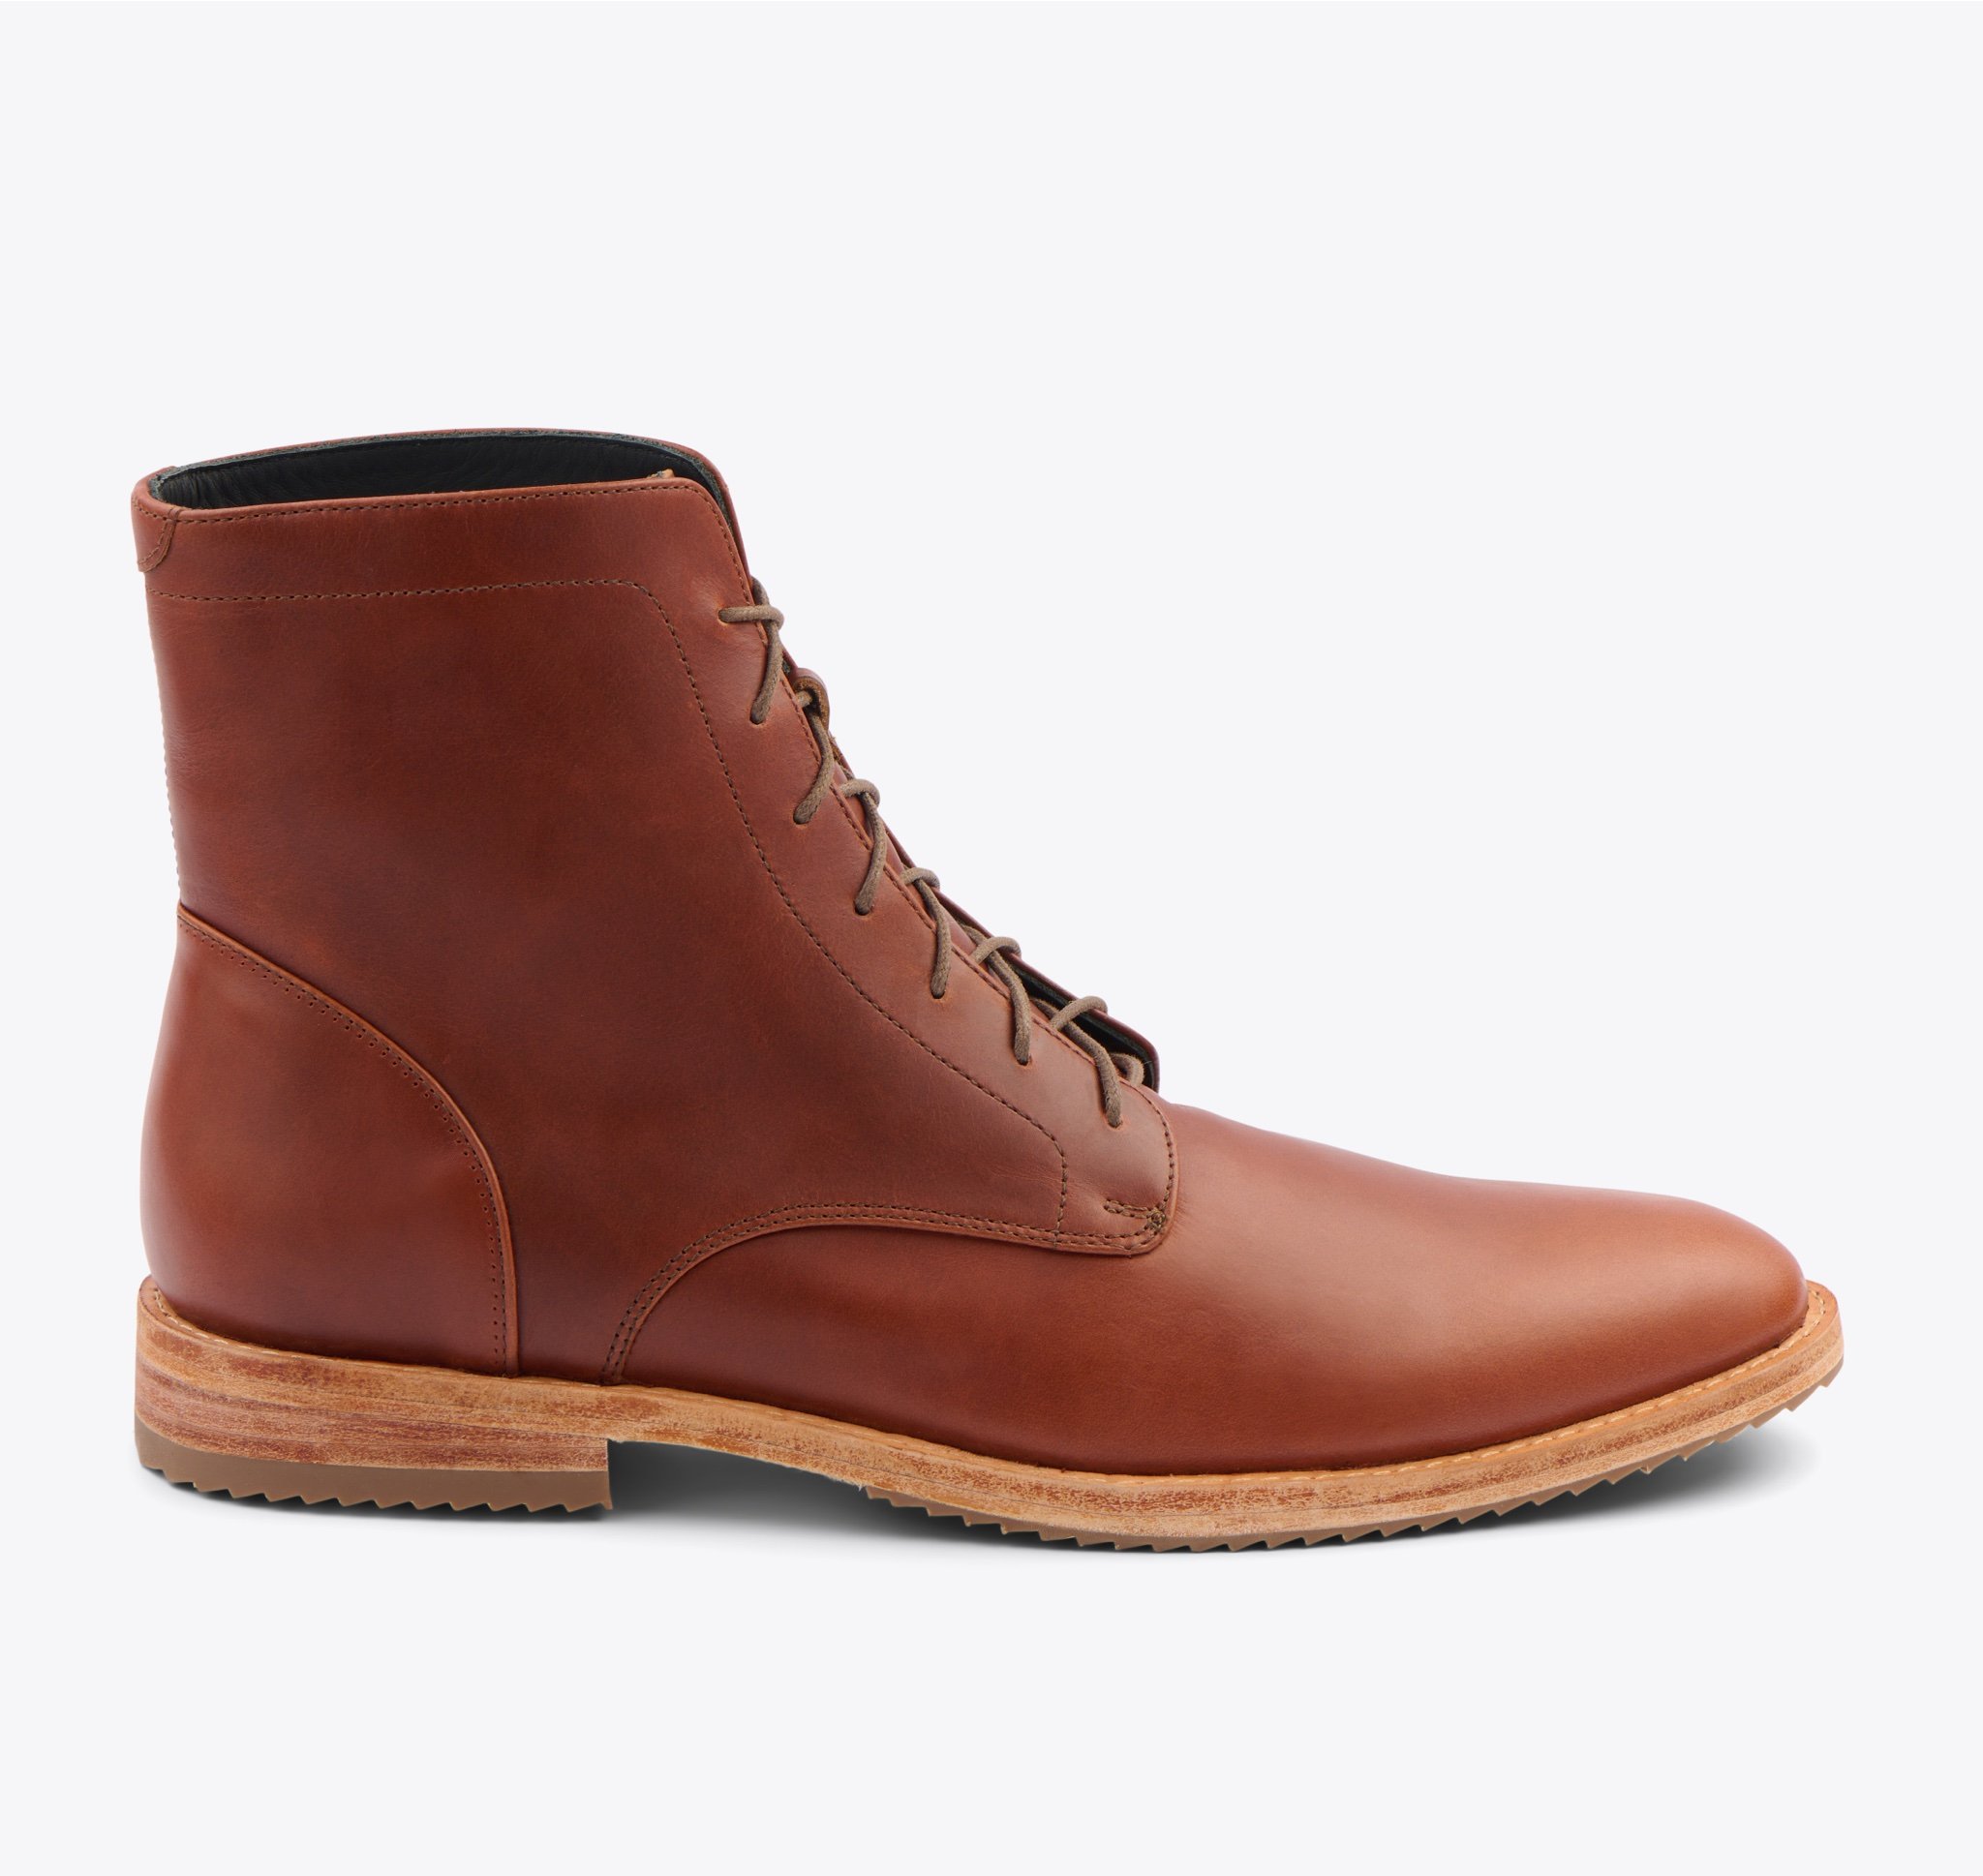 Nisolo Everyday Lace-Up Boot Brandy - Every Nisolo product is built on the foundation of comfort, function, and design. 